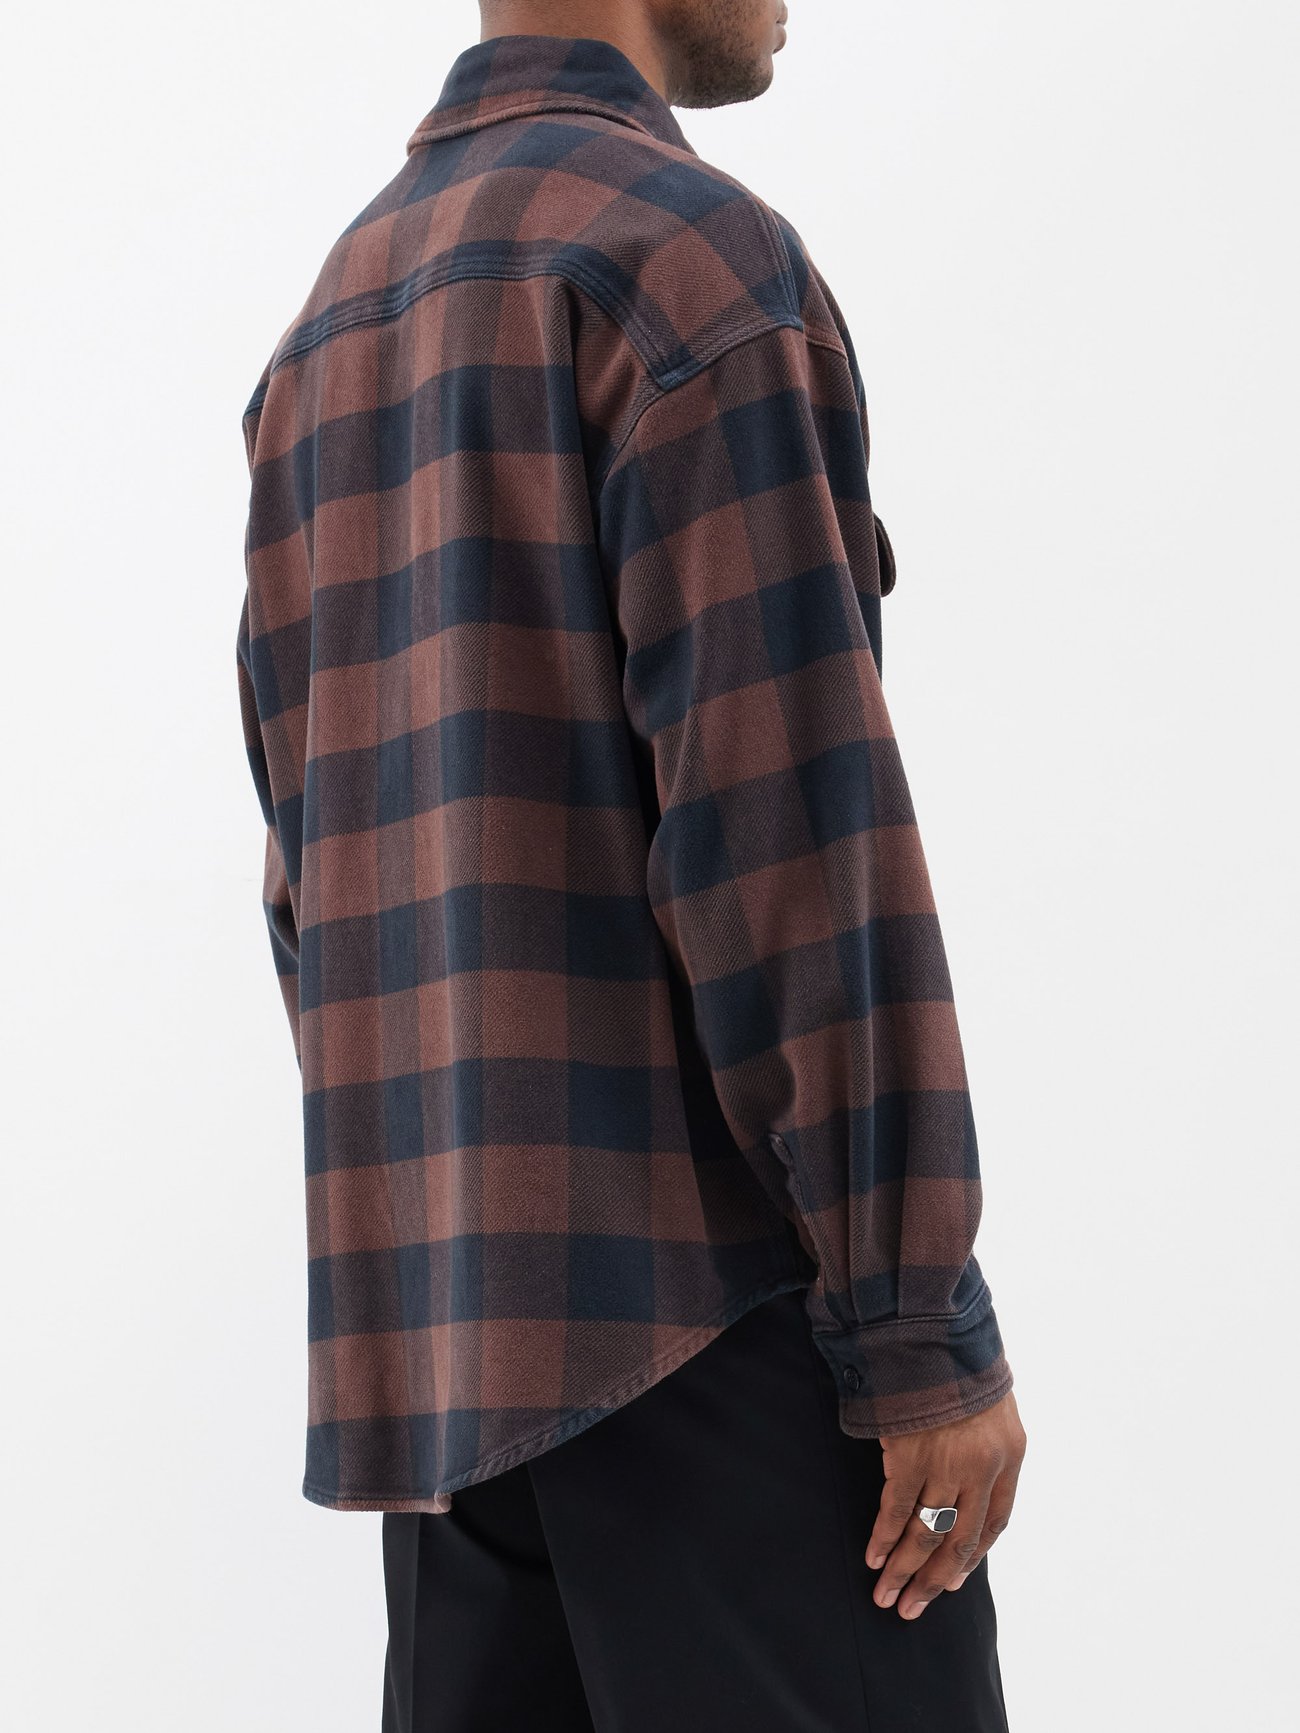 Monogram Check Overshirt in brown - Palm Angels® Official